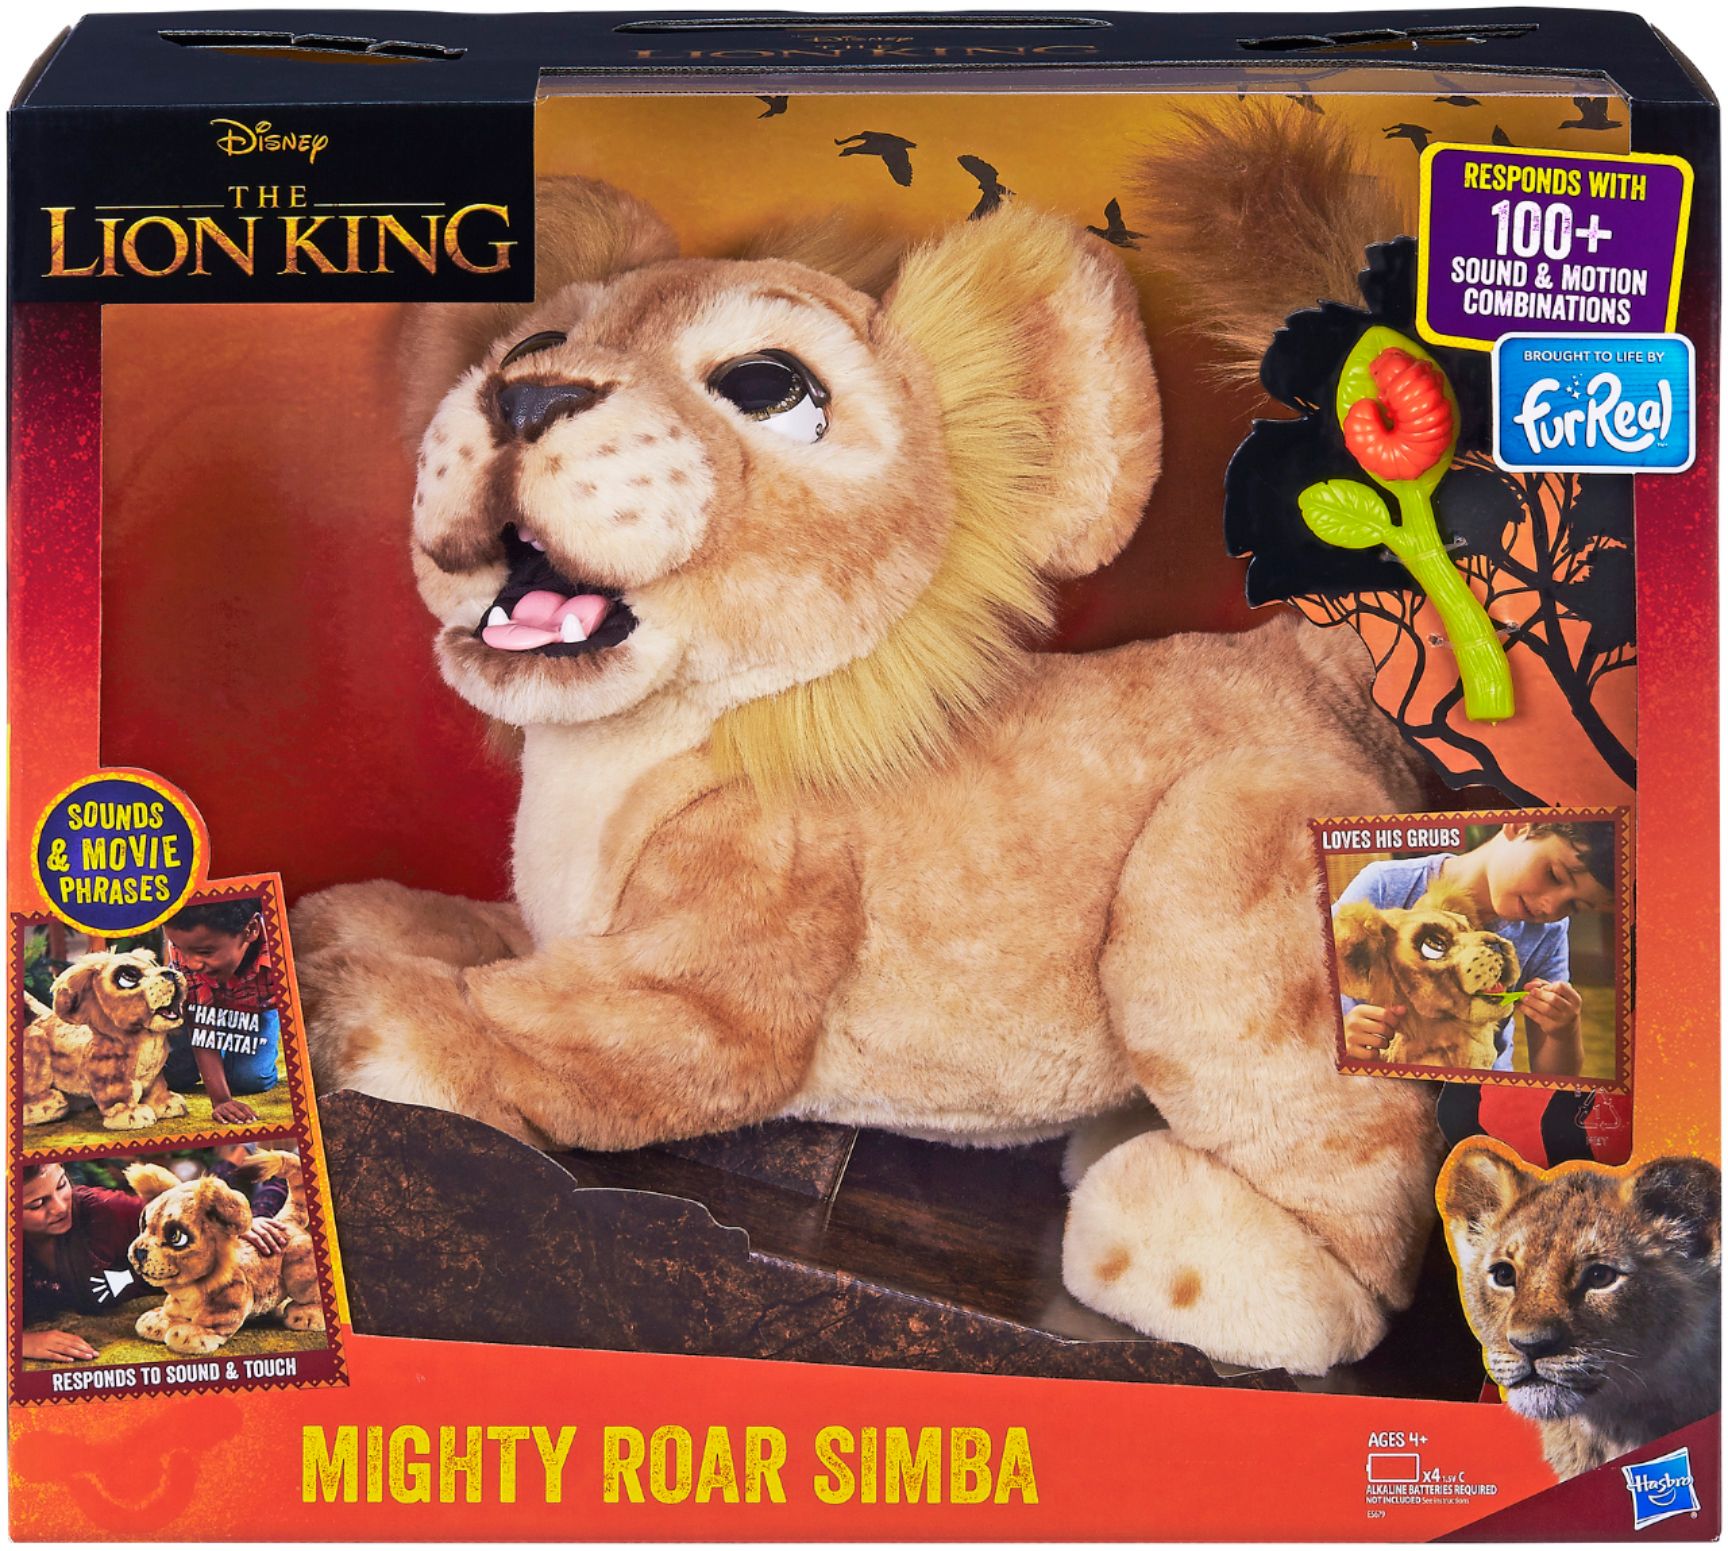 furReal E5679 Disney The Lion King Mighty Roar Simba Interactive Plush Toy for sale online